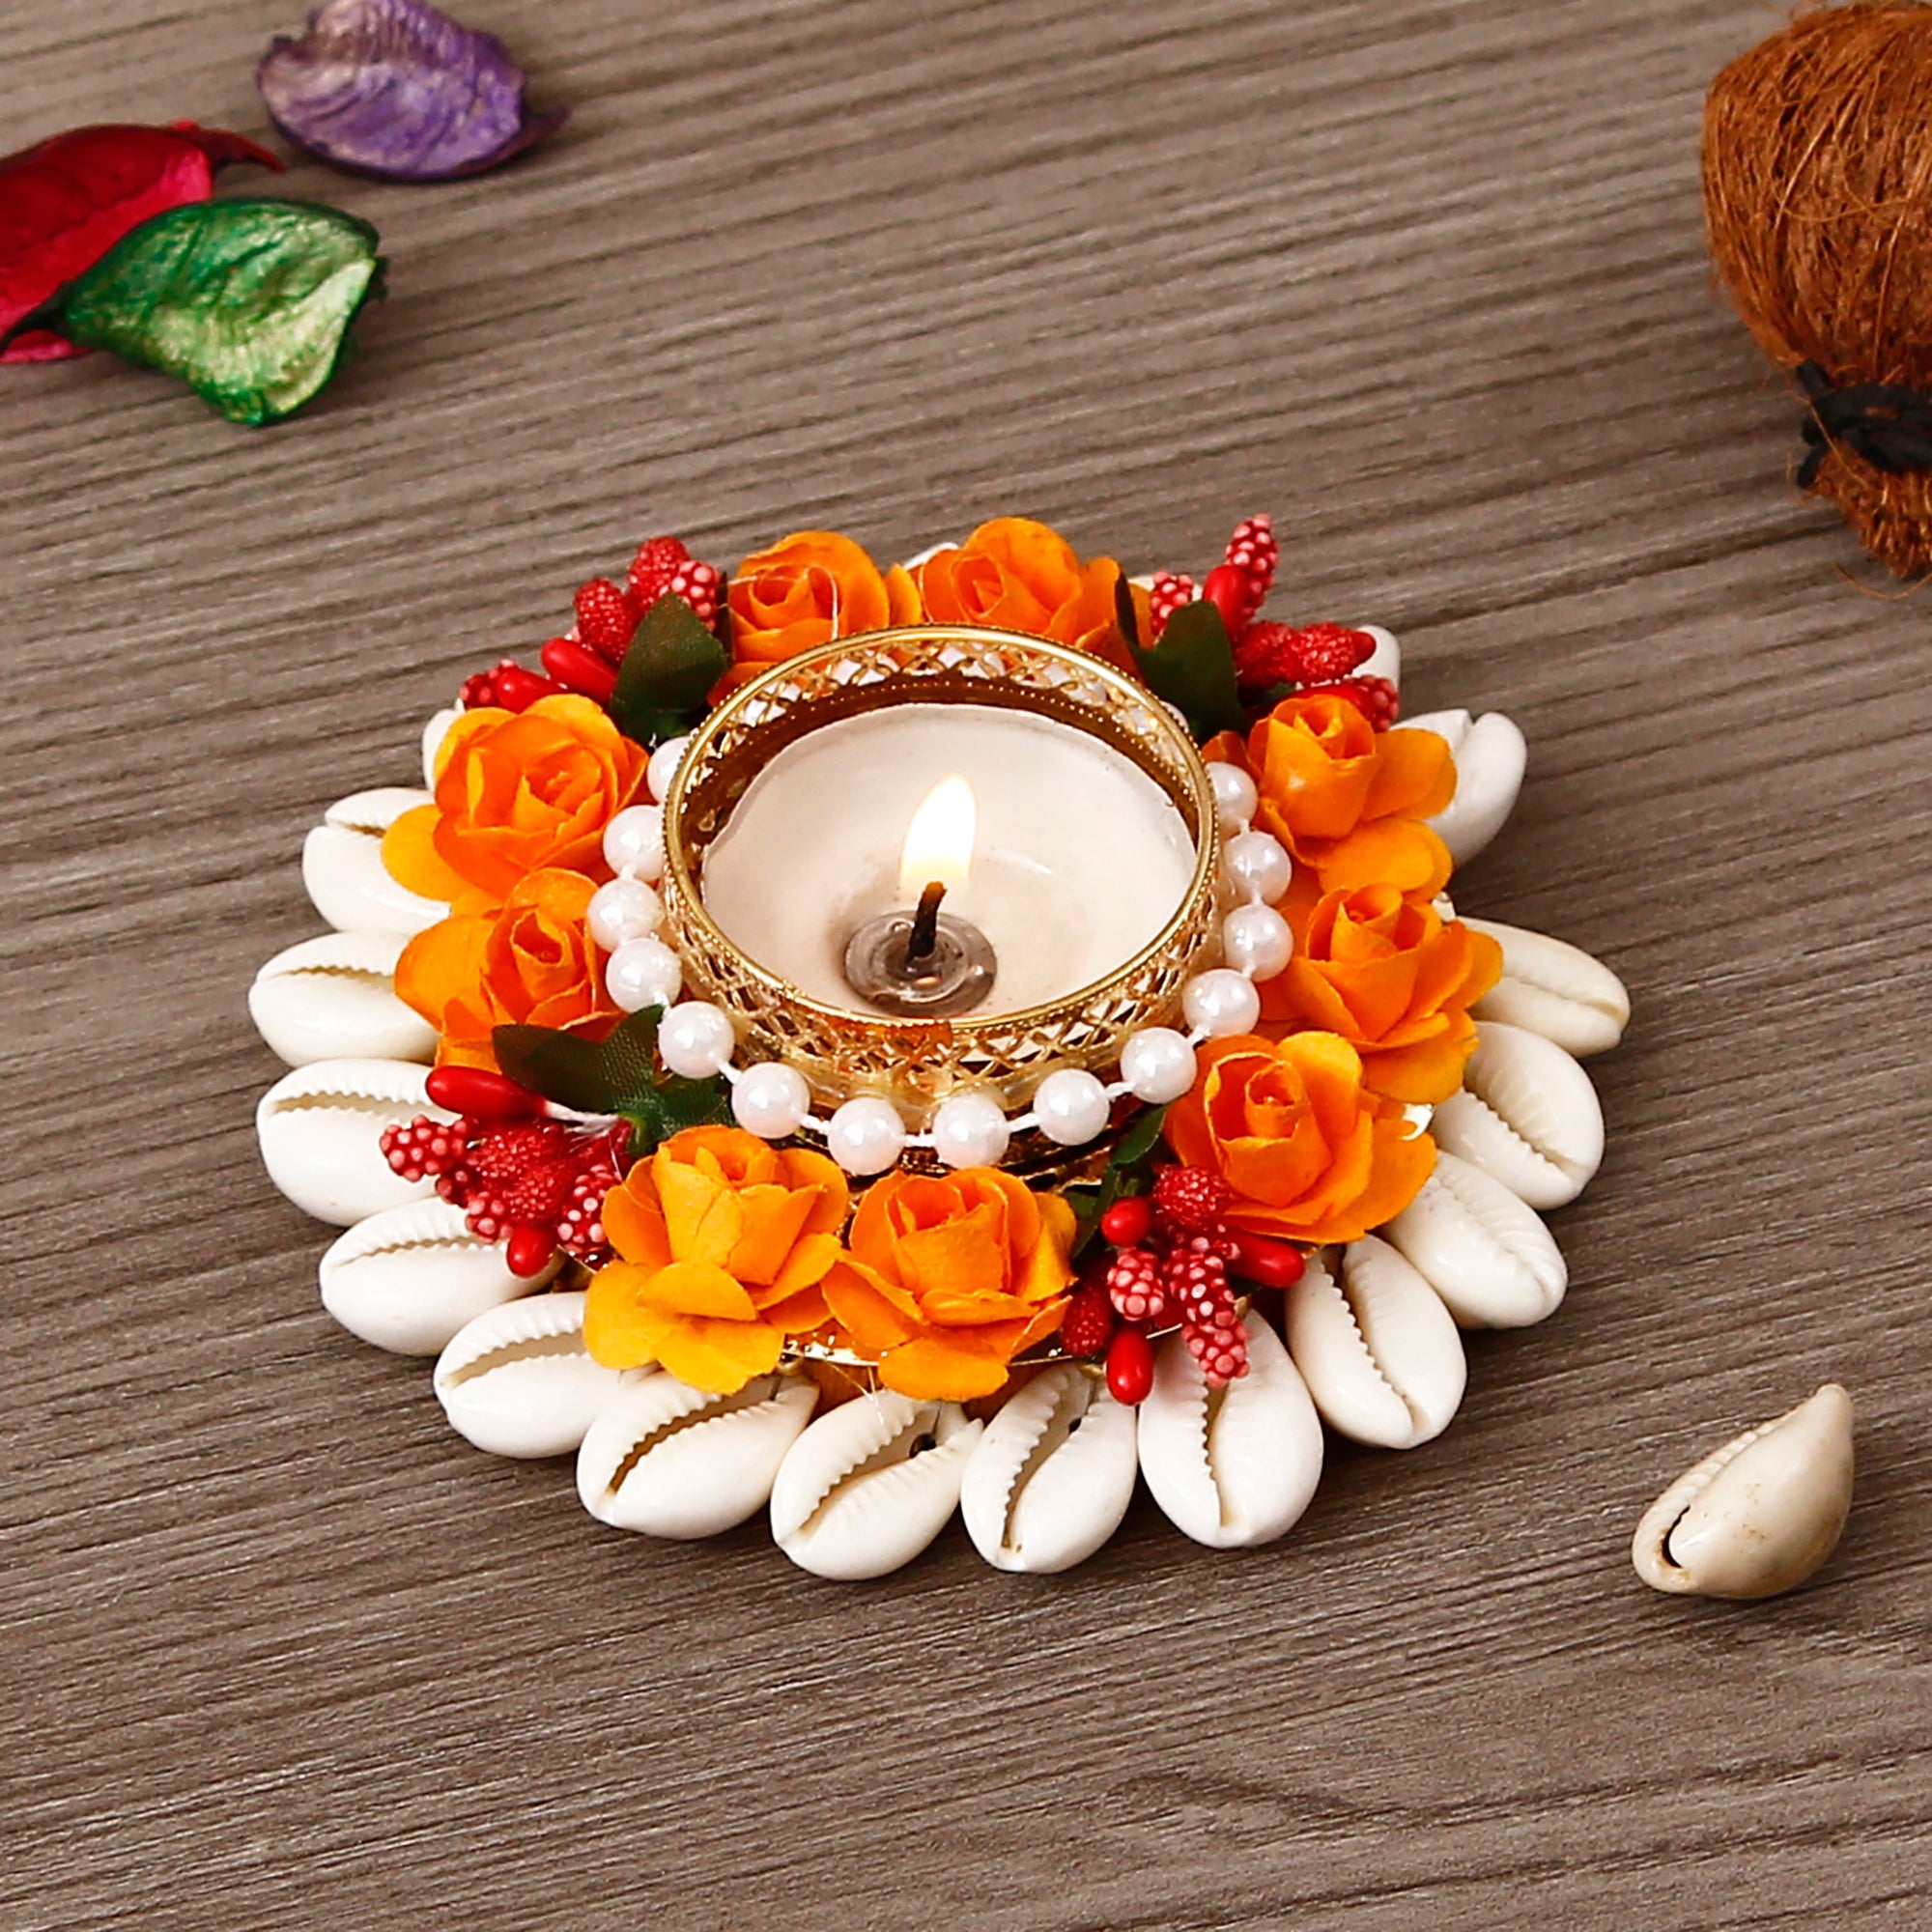 Shells and Floral Design Handcrafted Round Tea Light Candle Holder